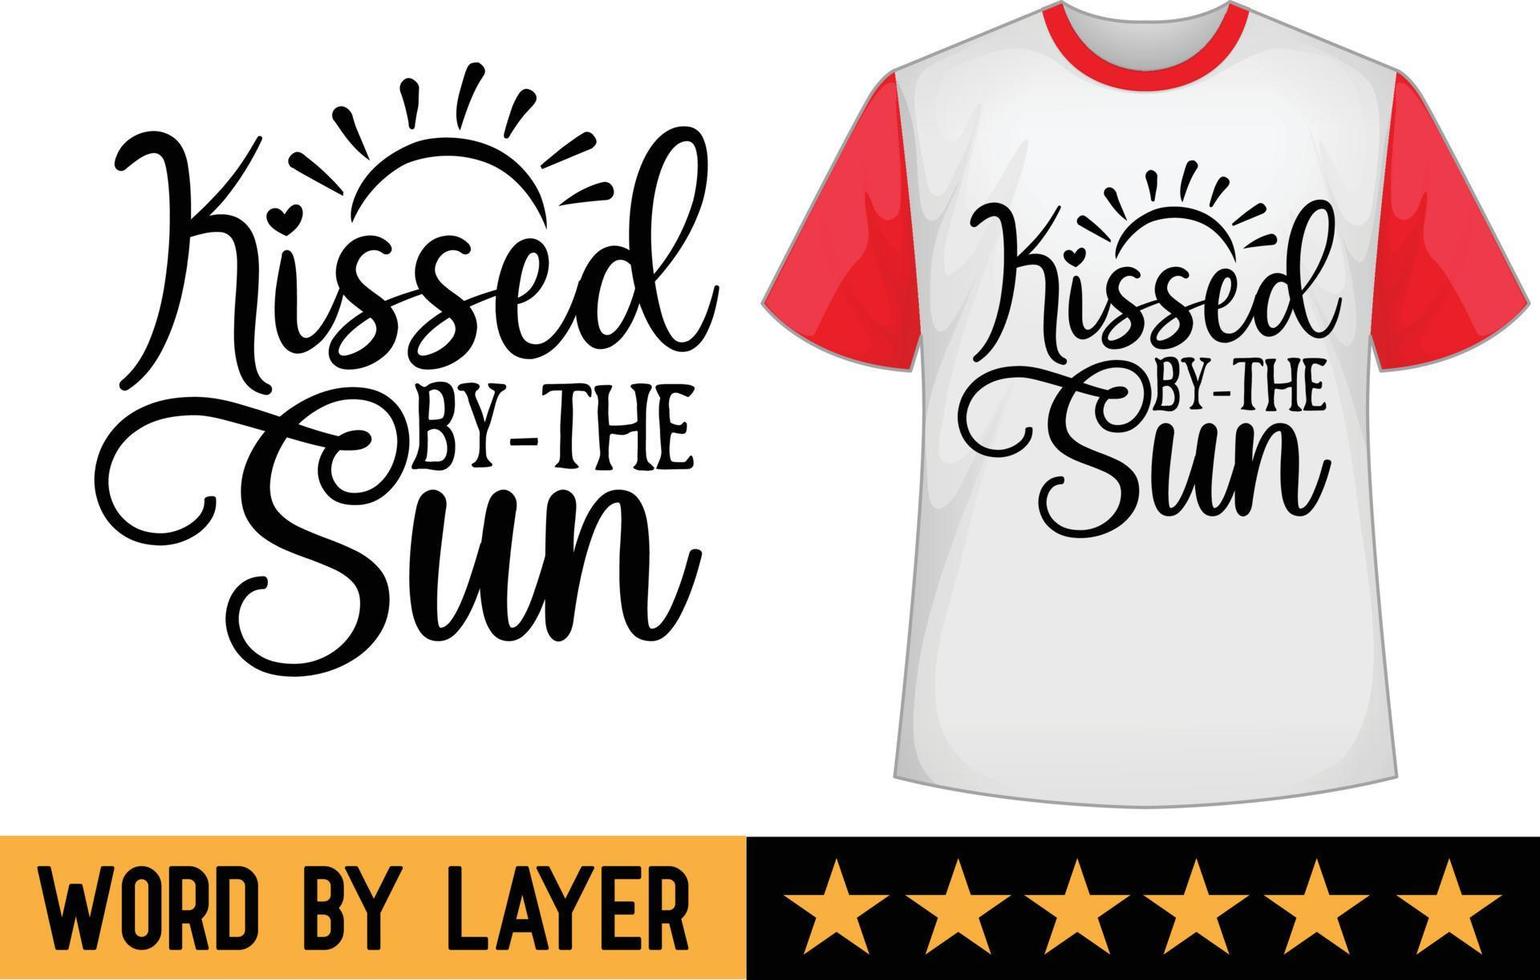 Kissed by-the sun svg t shirt design vector